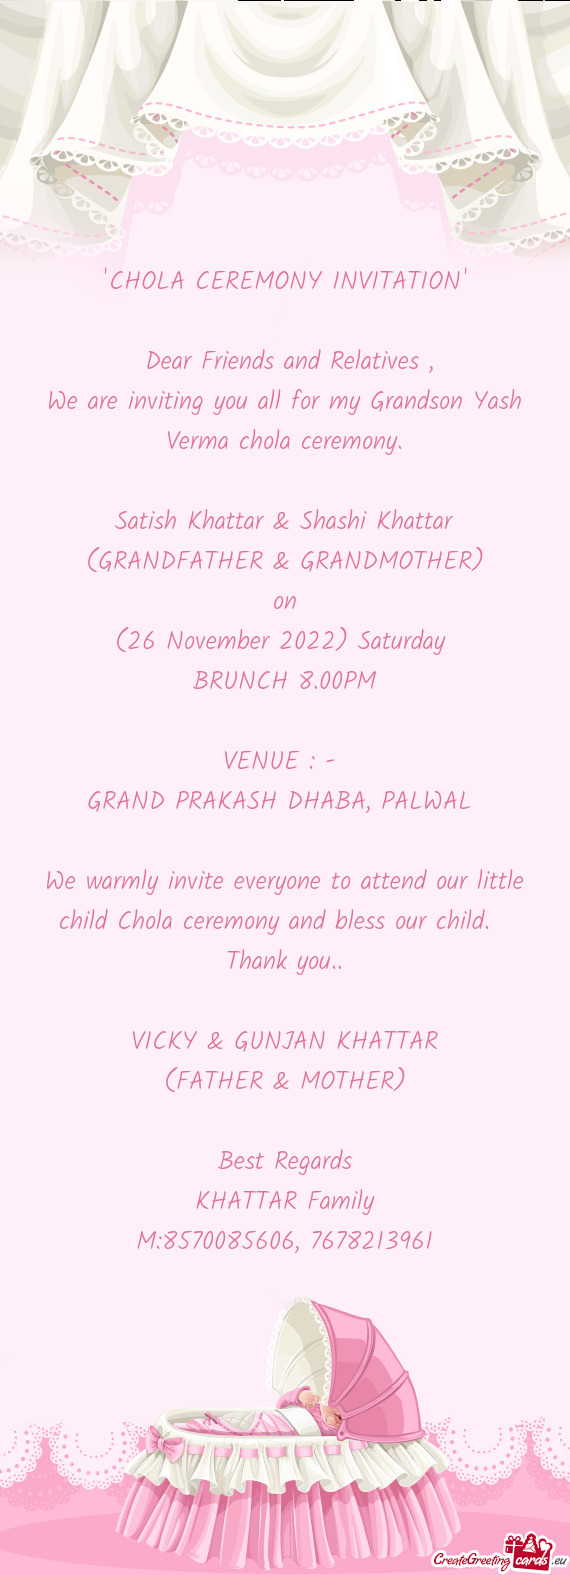 We are inviting you all for my Grandson Yash Verma chola ceremony